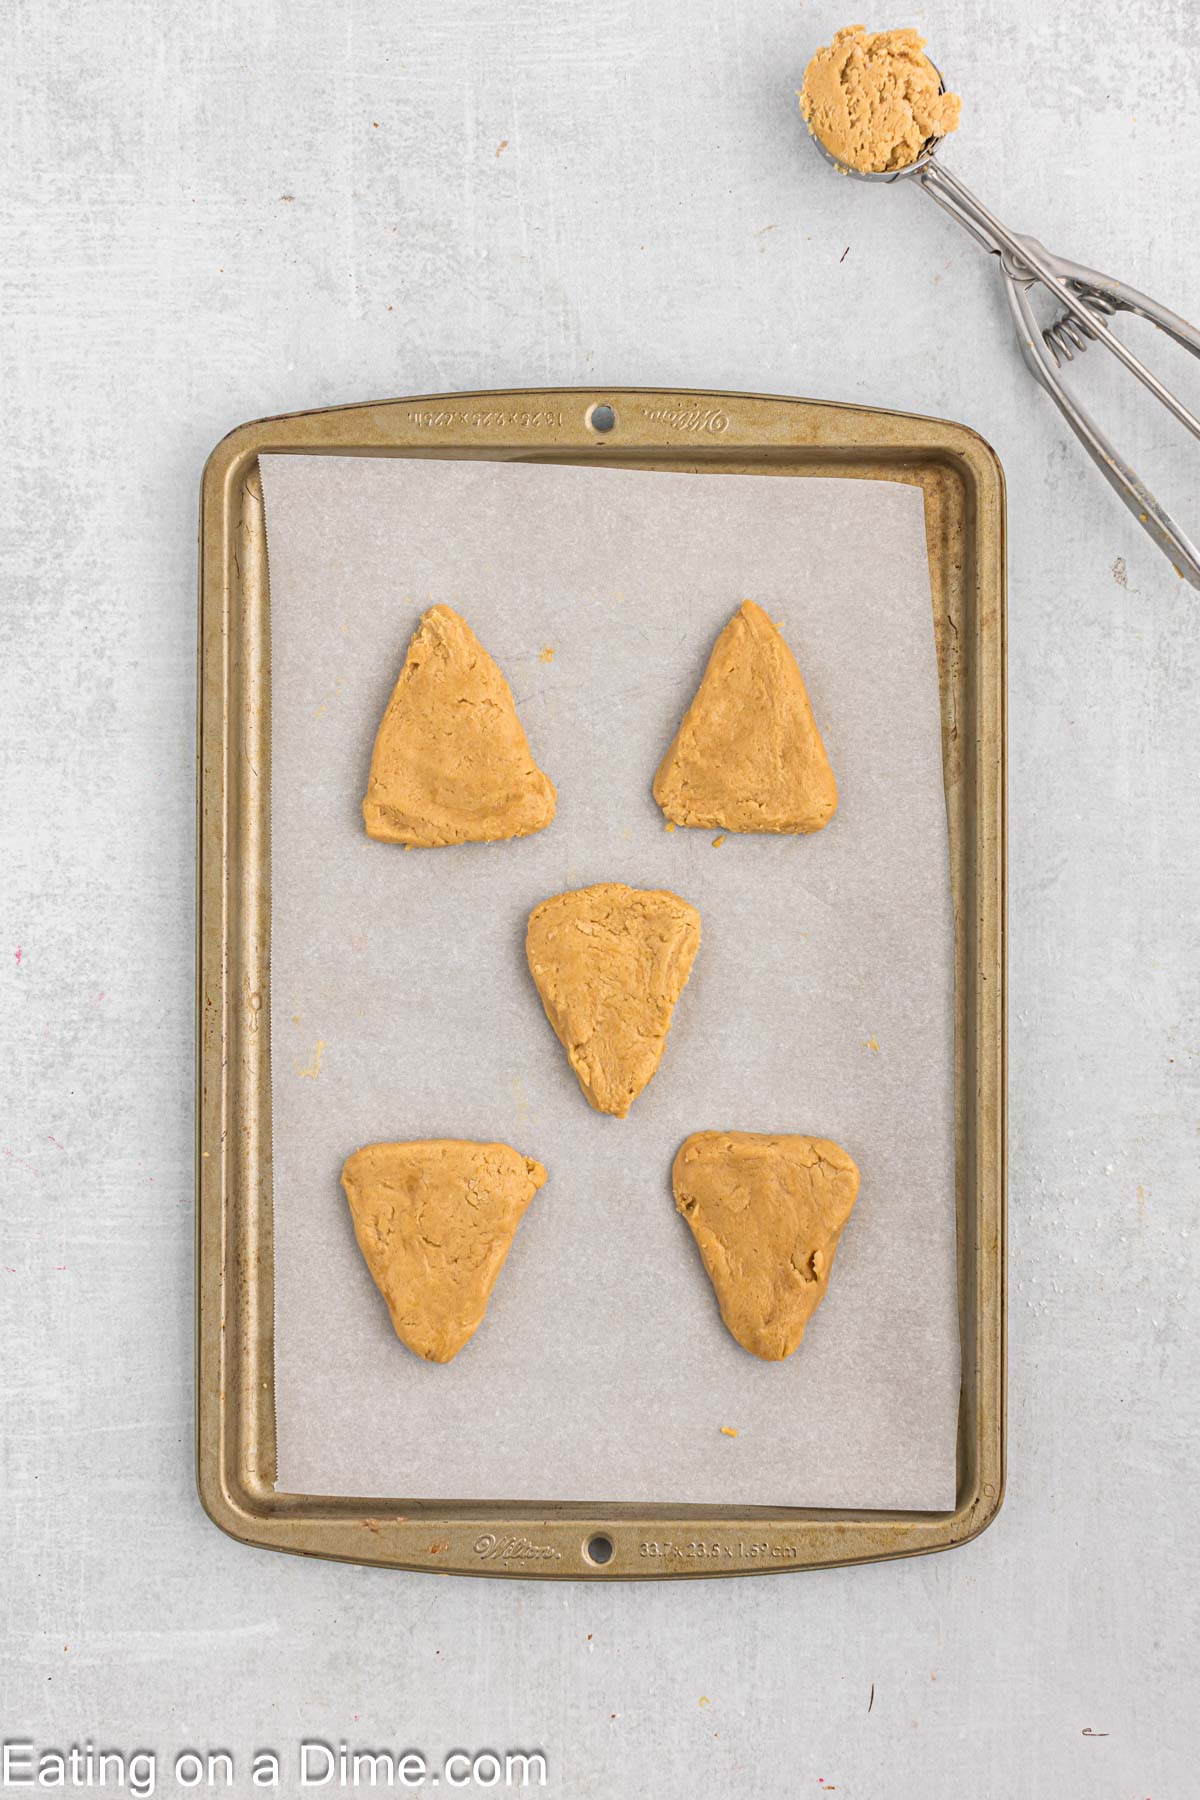 Scoop cookie dough with cookie scoop and shape into a triangle and place on a baking sheet